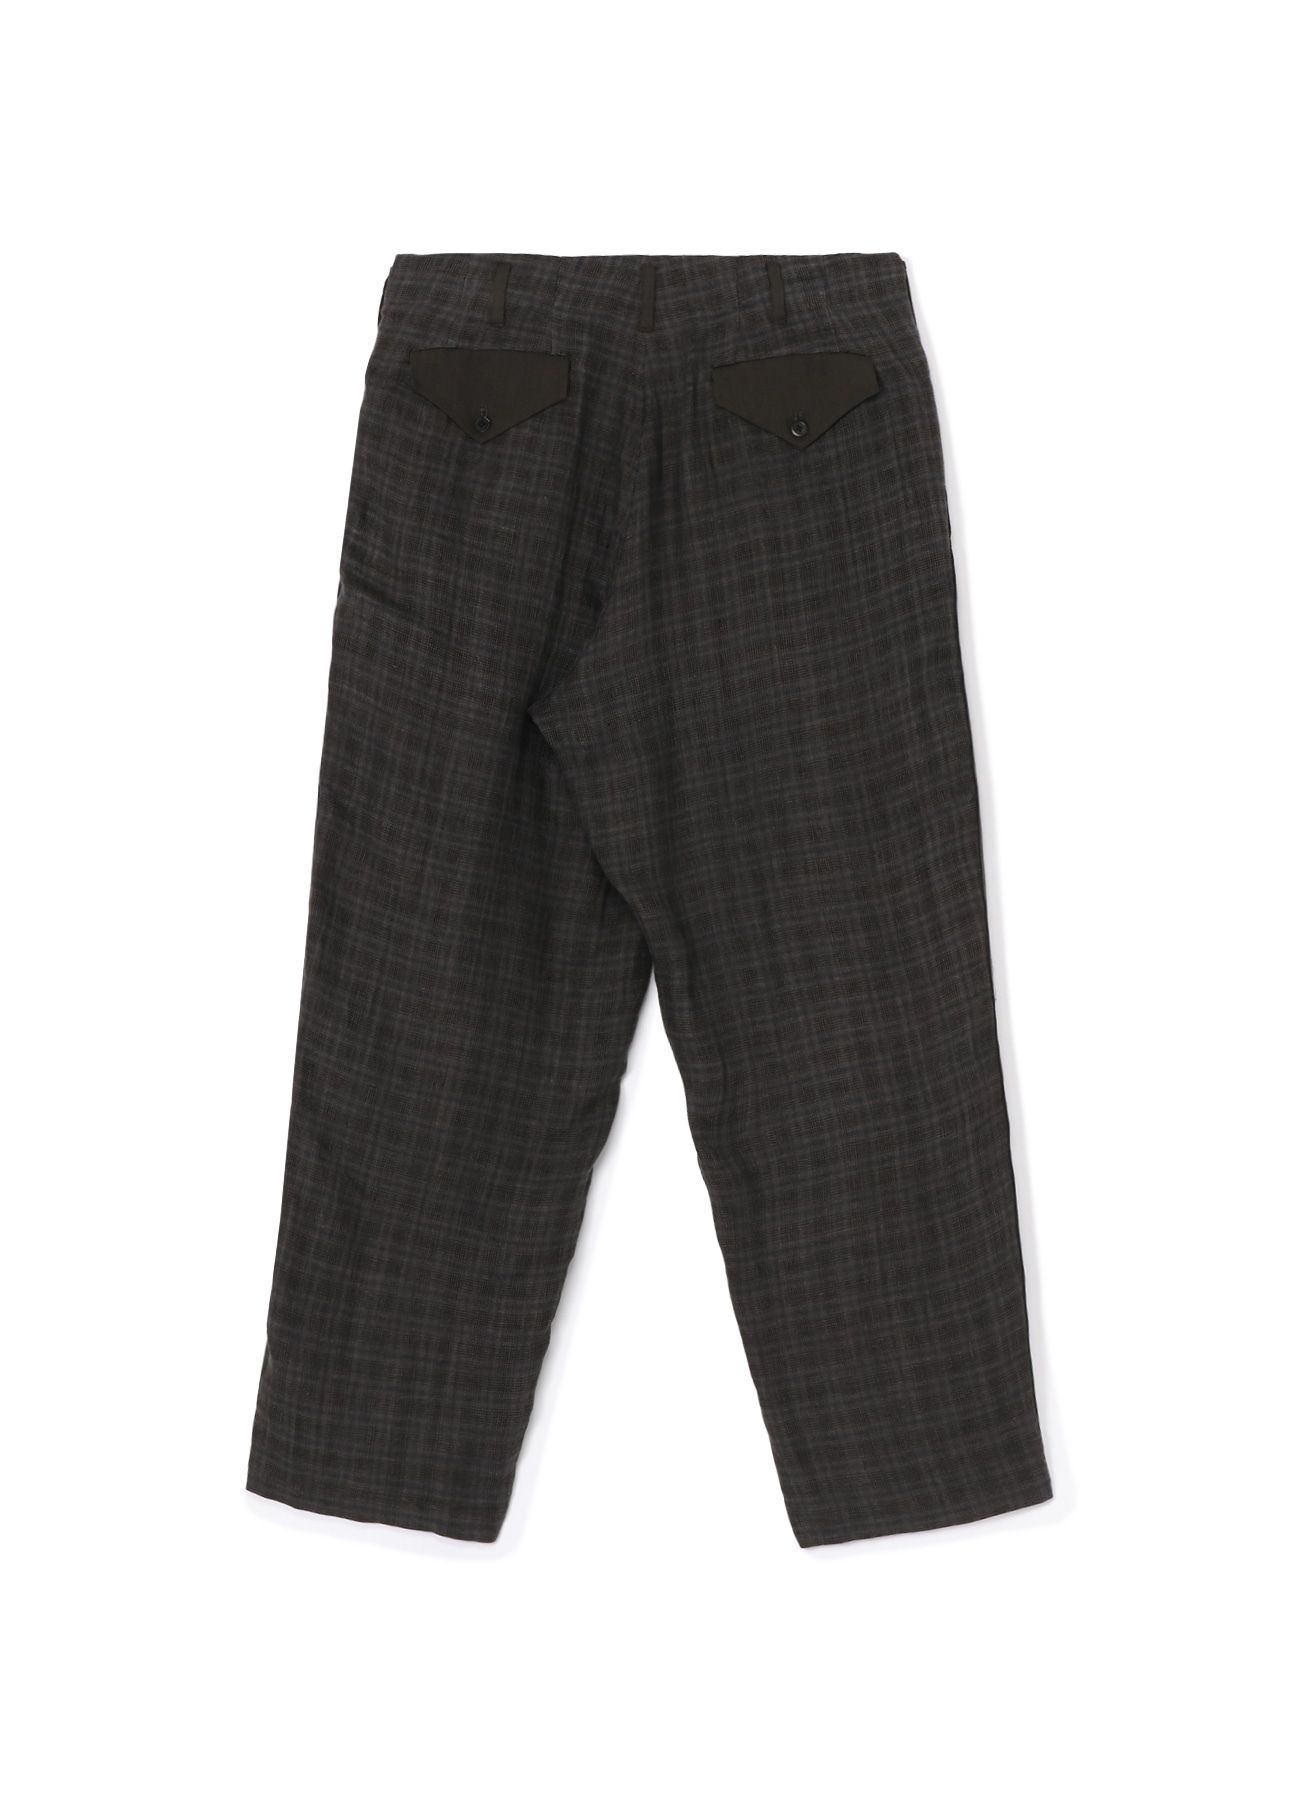 LINEN TWILL PLAID PANTS WITH SIDE TAPE(S Black): Y's for men 